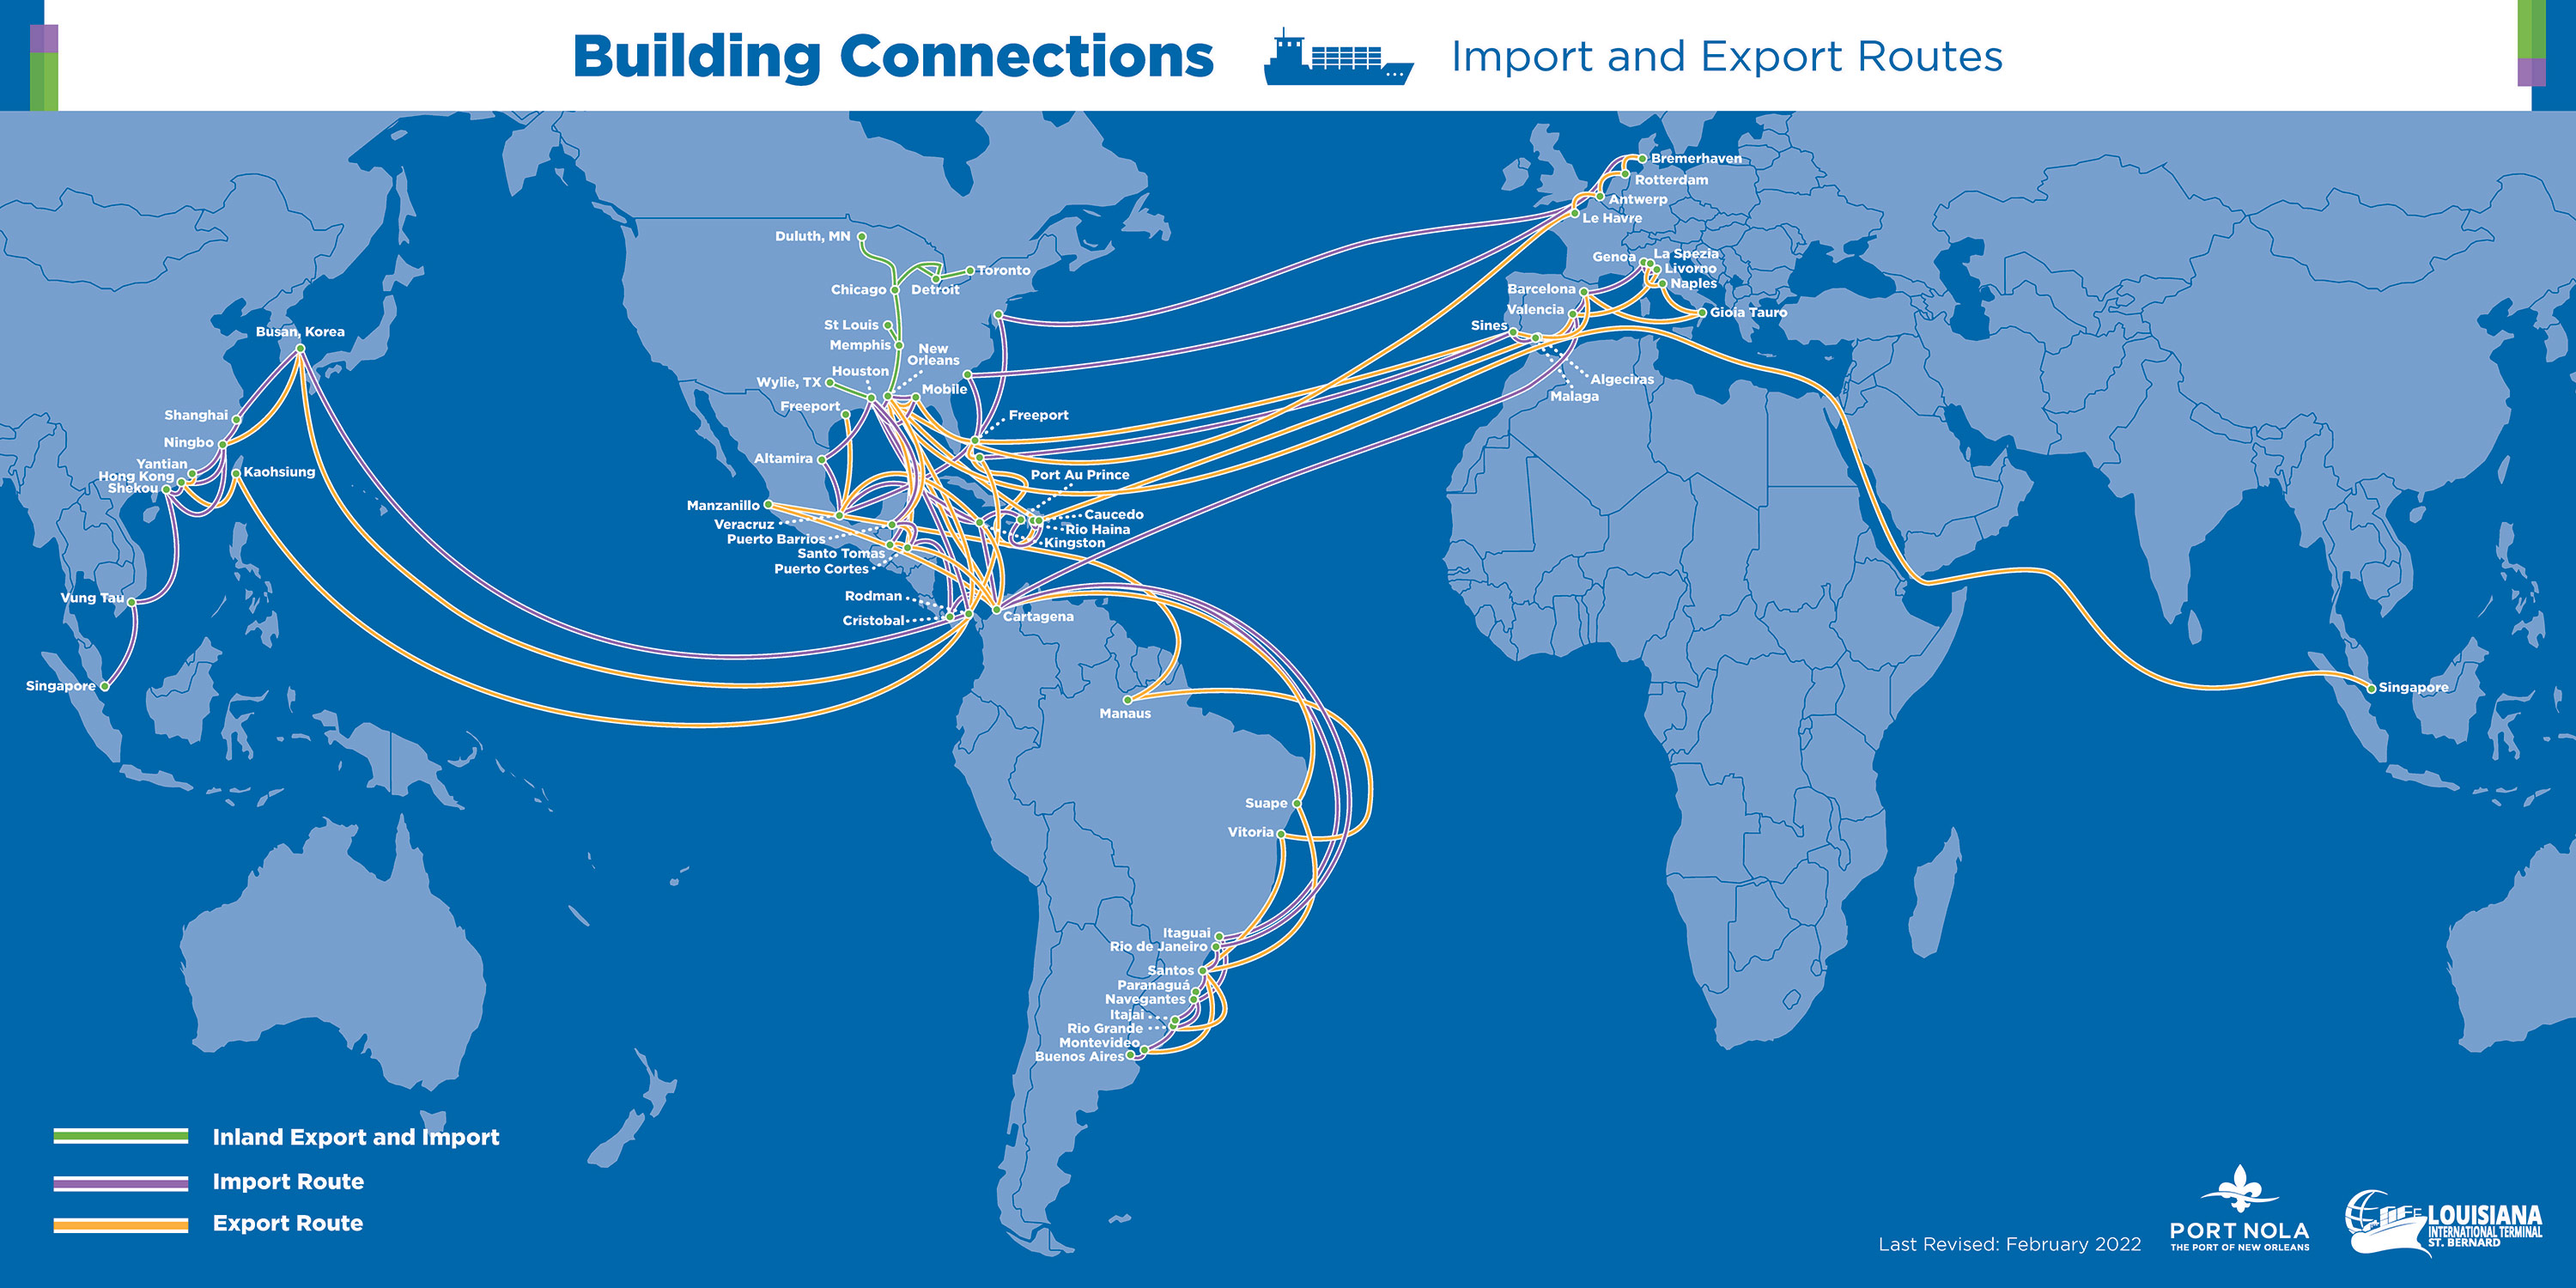 World map showing import and export routes for the Port of New Orleans and the proposed Louisiana International Terminal. 